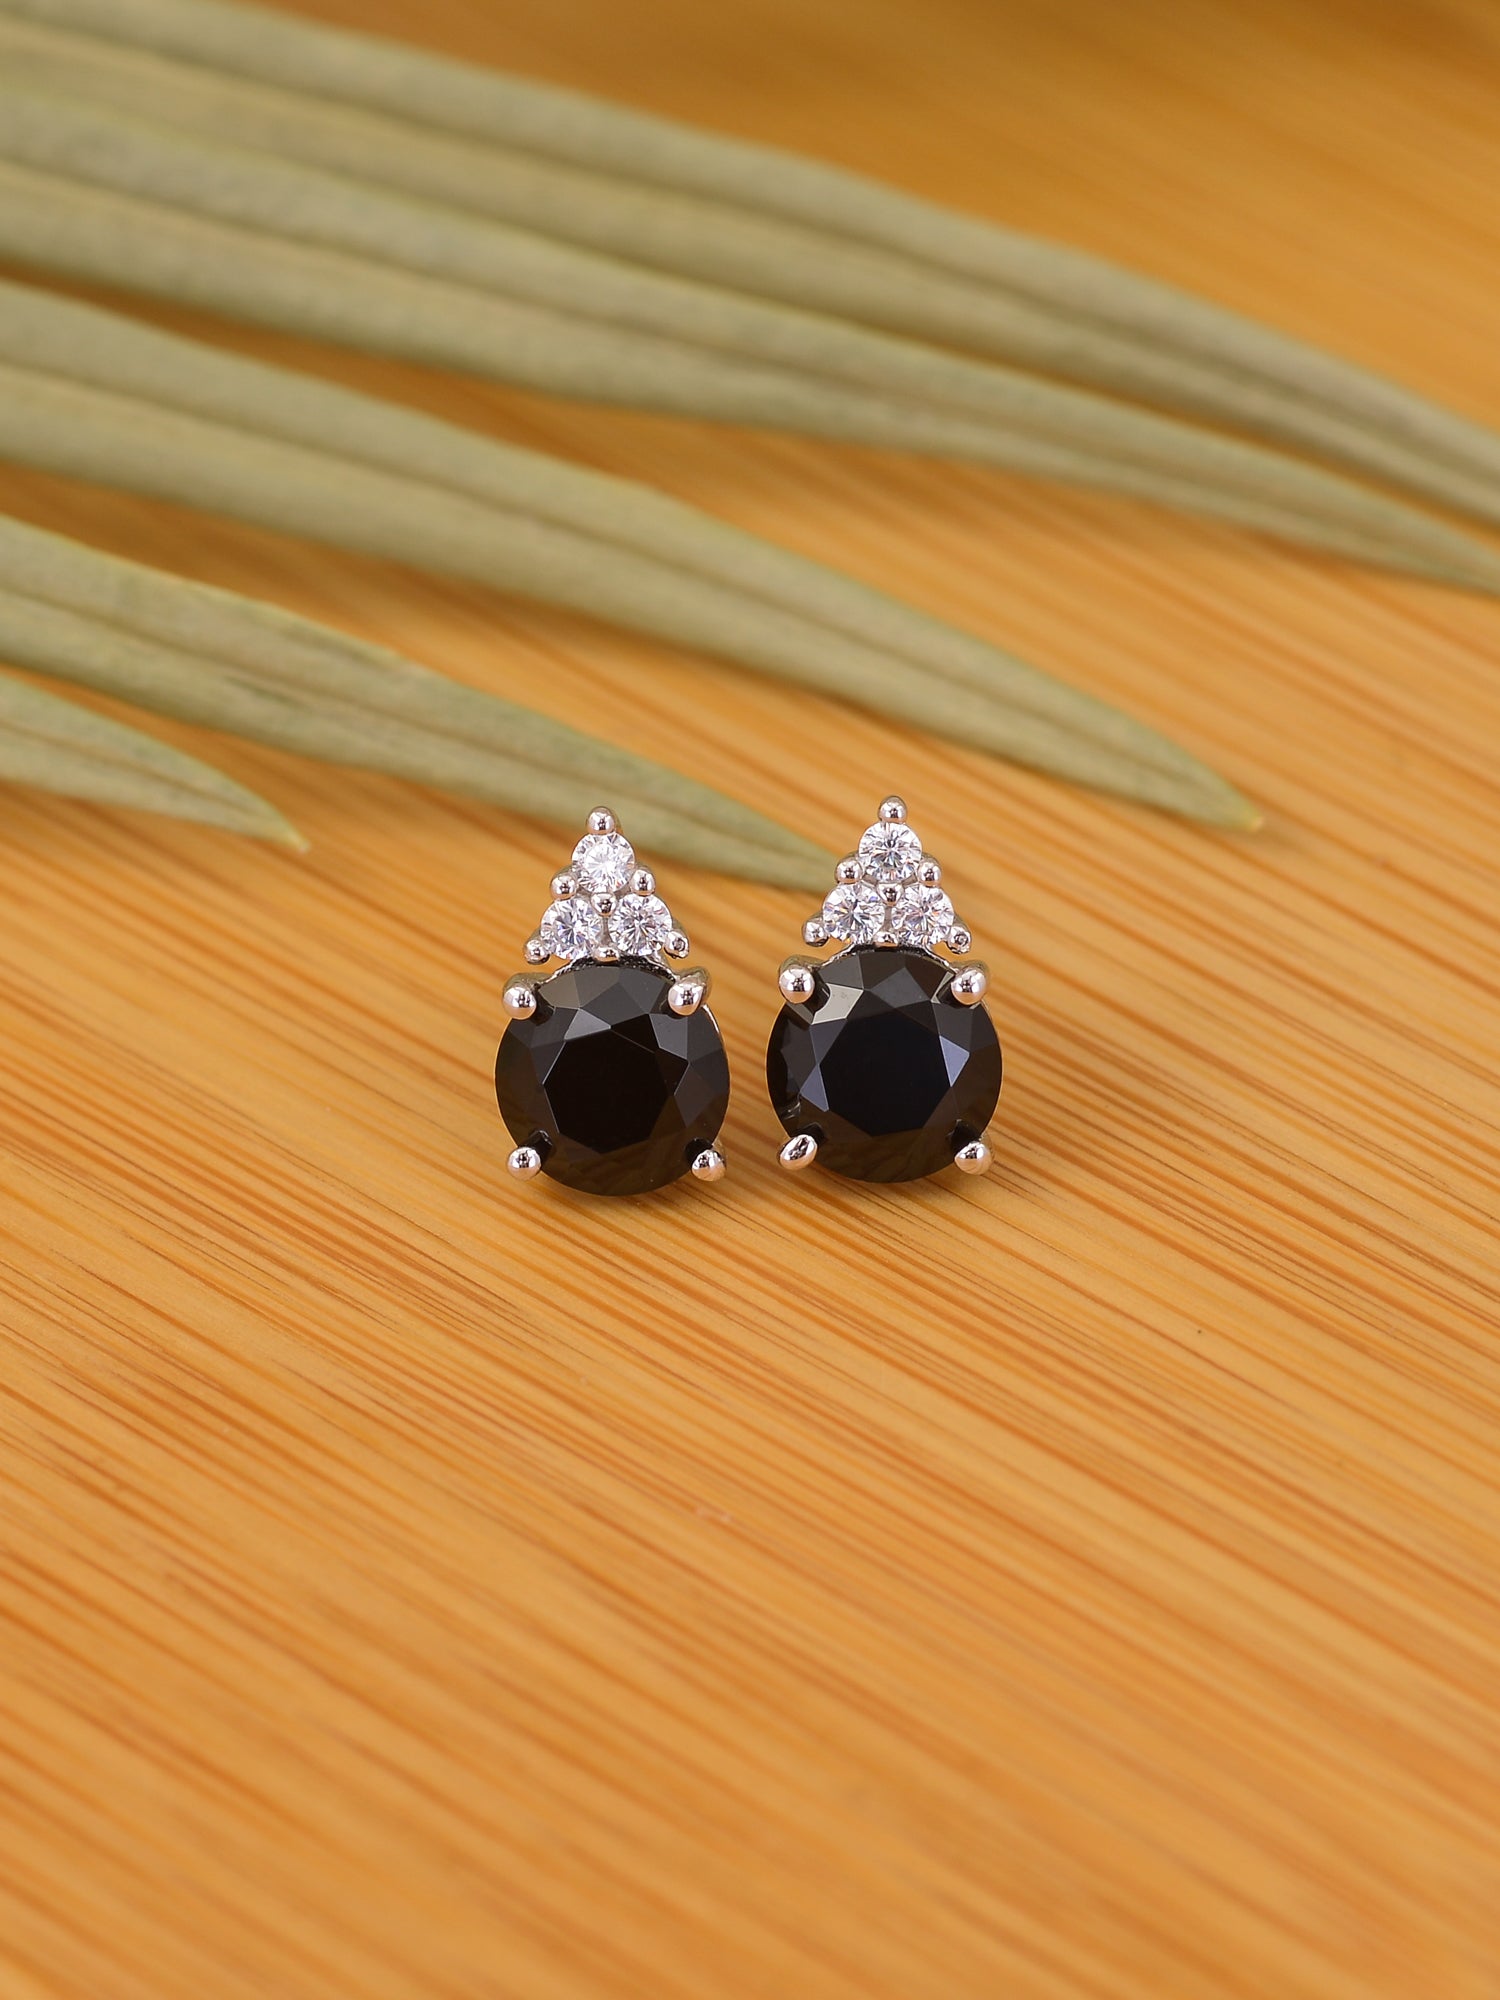 BLACK SOLITAIRE STUDS IN 925 STERLING SILVER